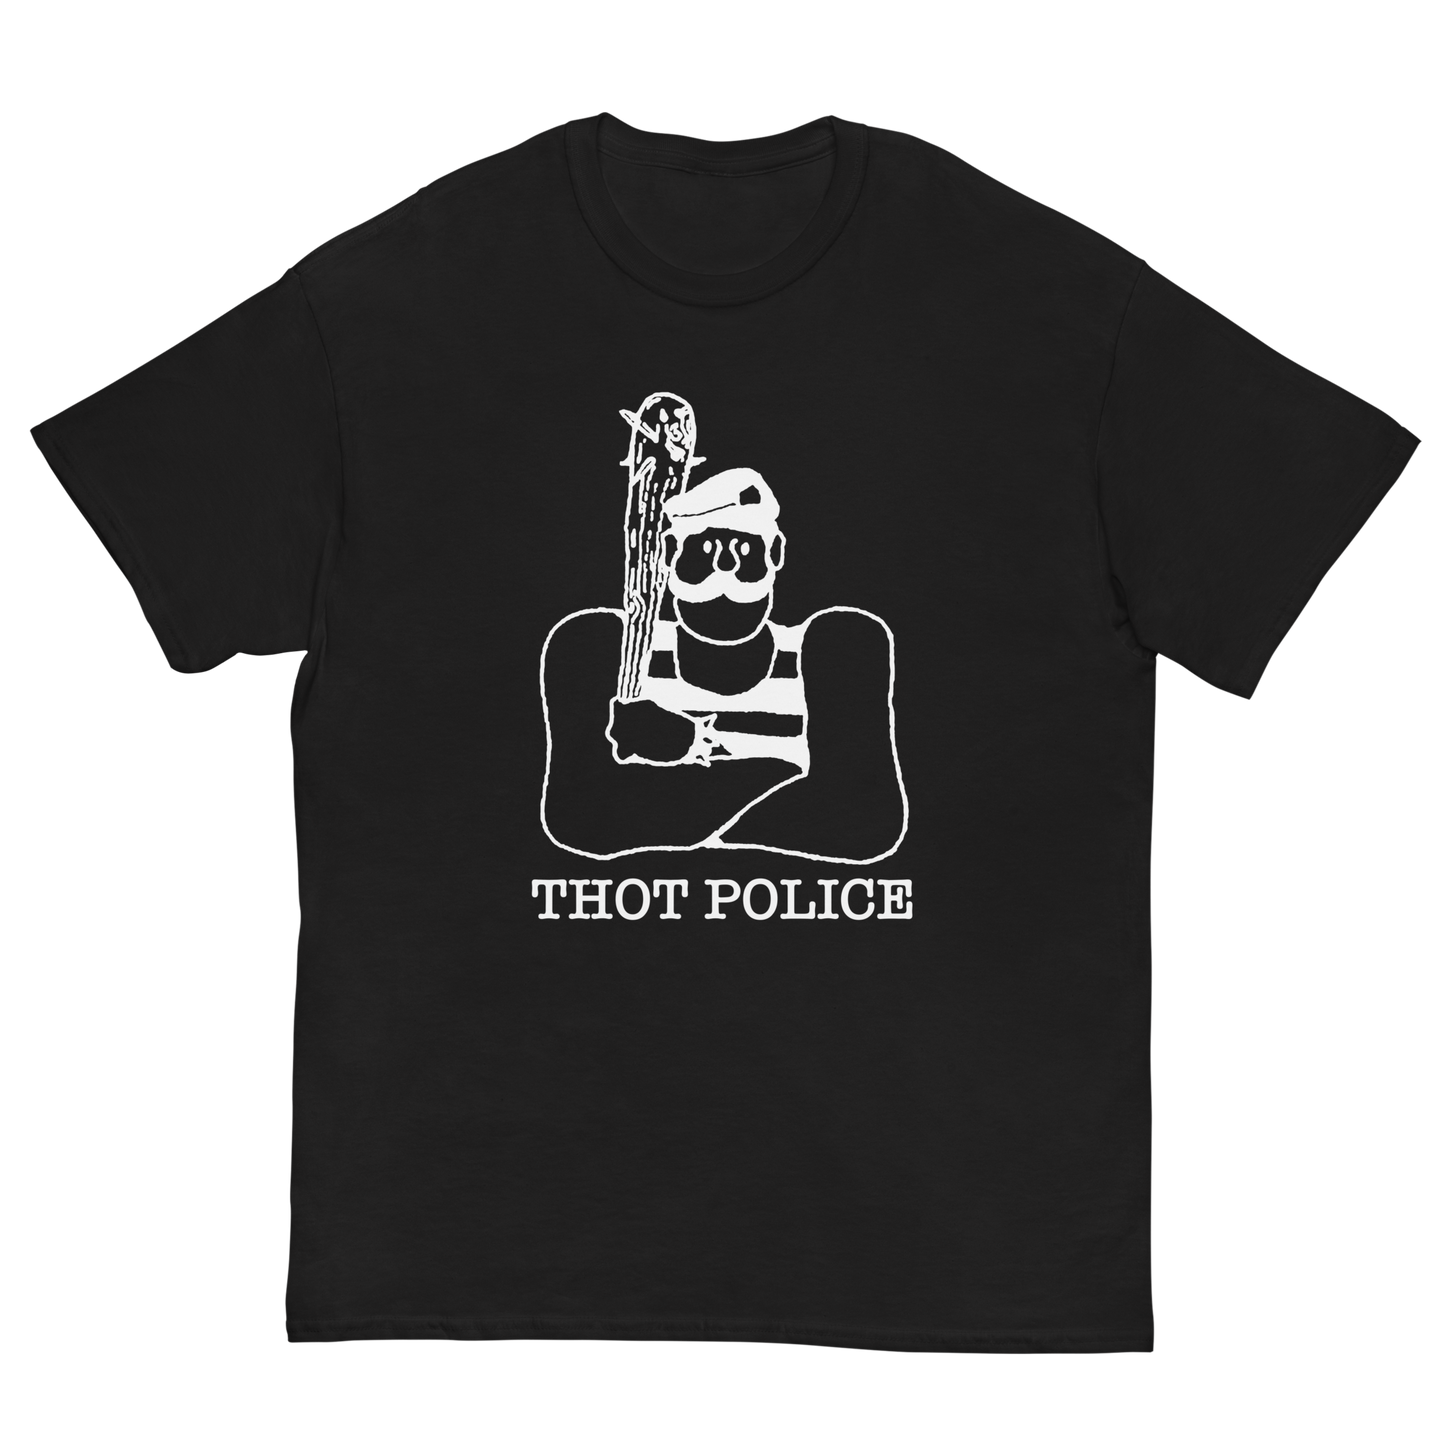 THOT POLICE T-SHIRT